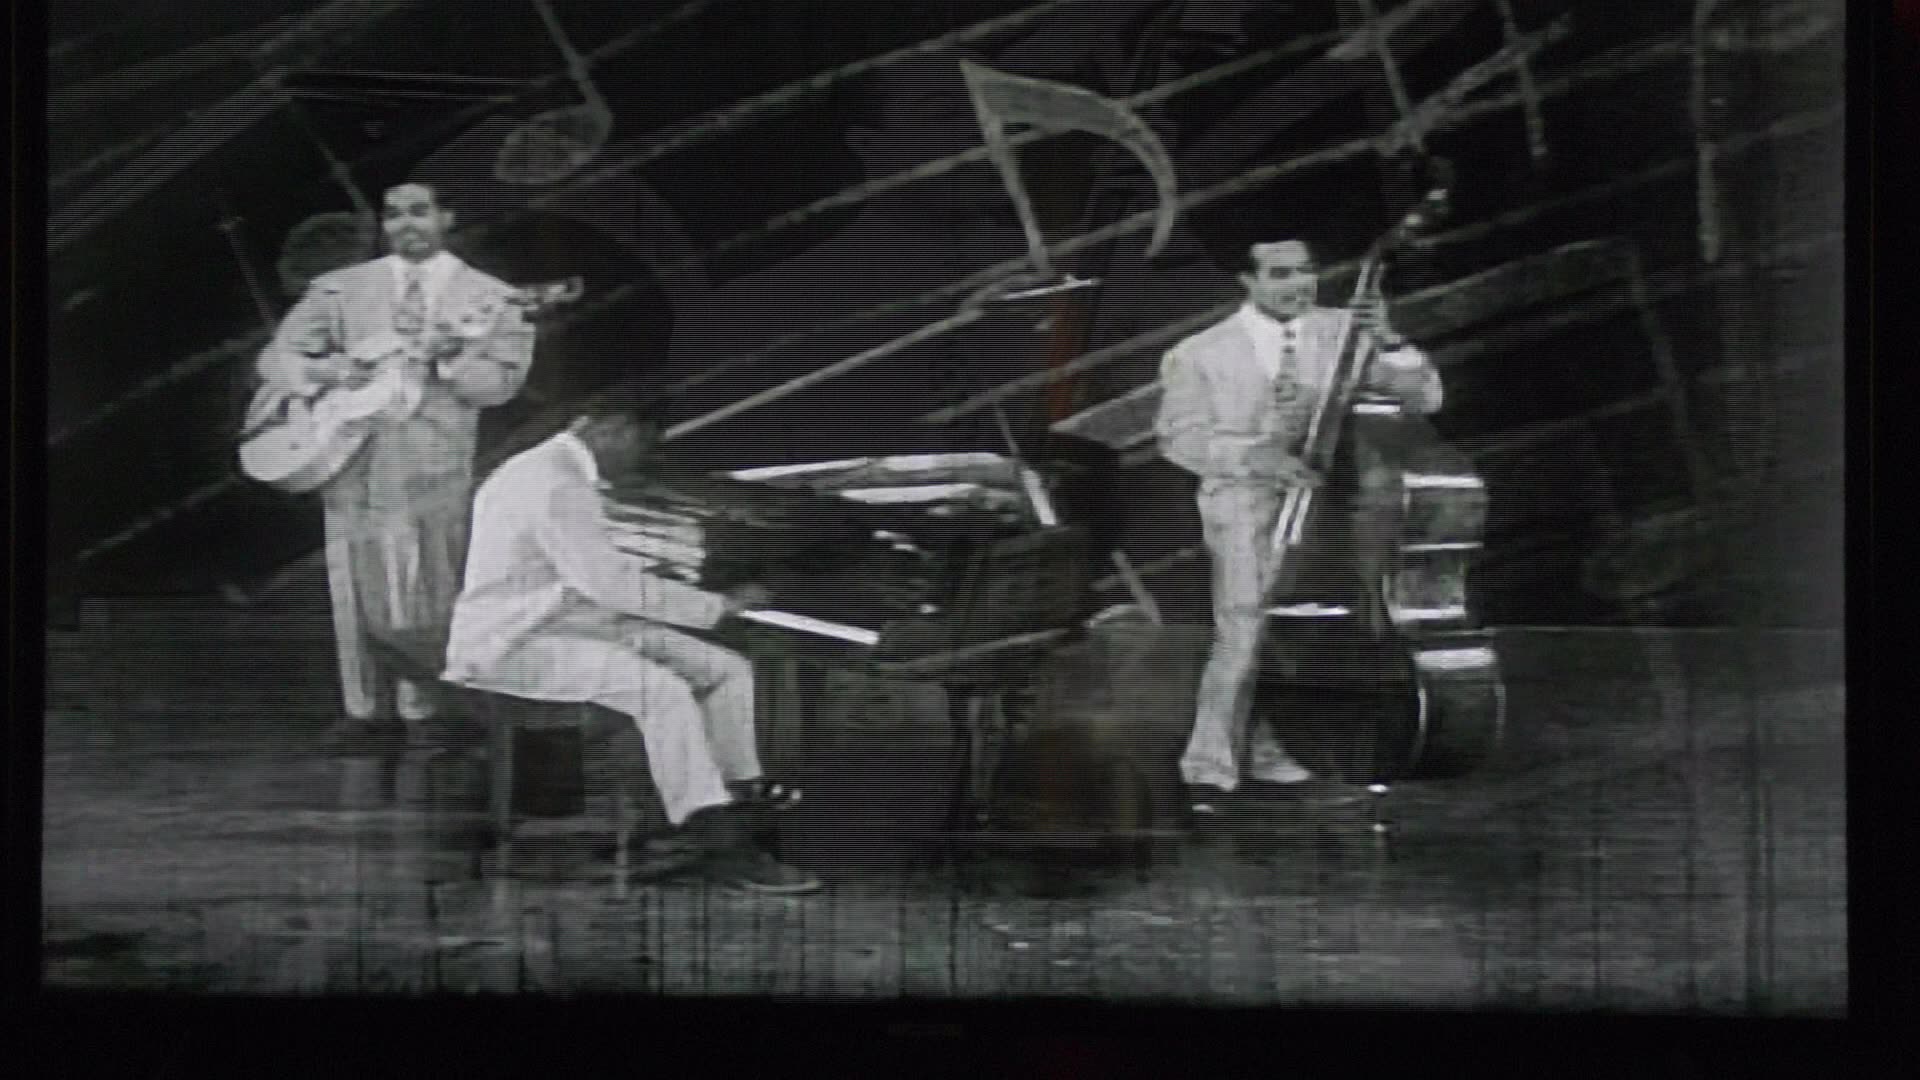 2 hot songs from the ( Nat ) "King Cole Trio" 1948 movie "Killer Diller".